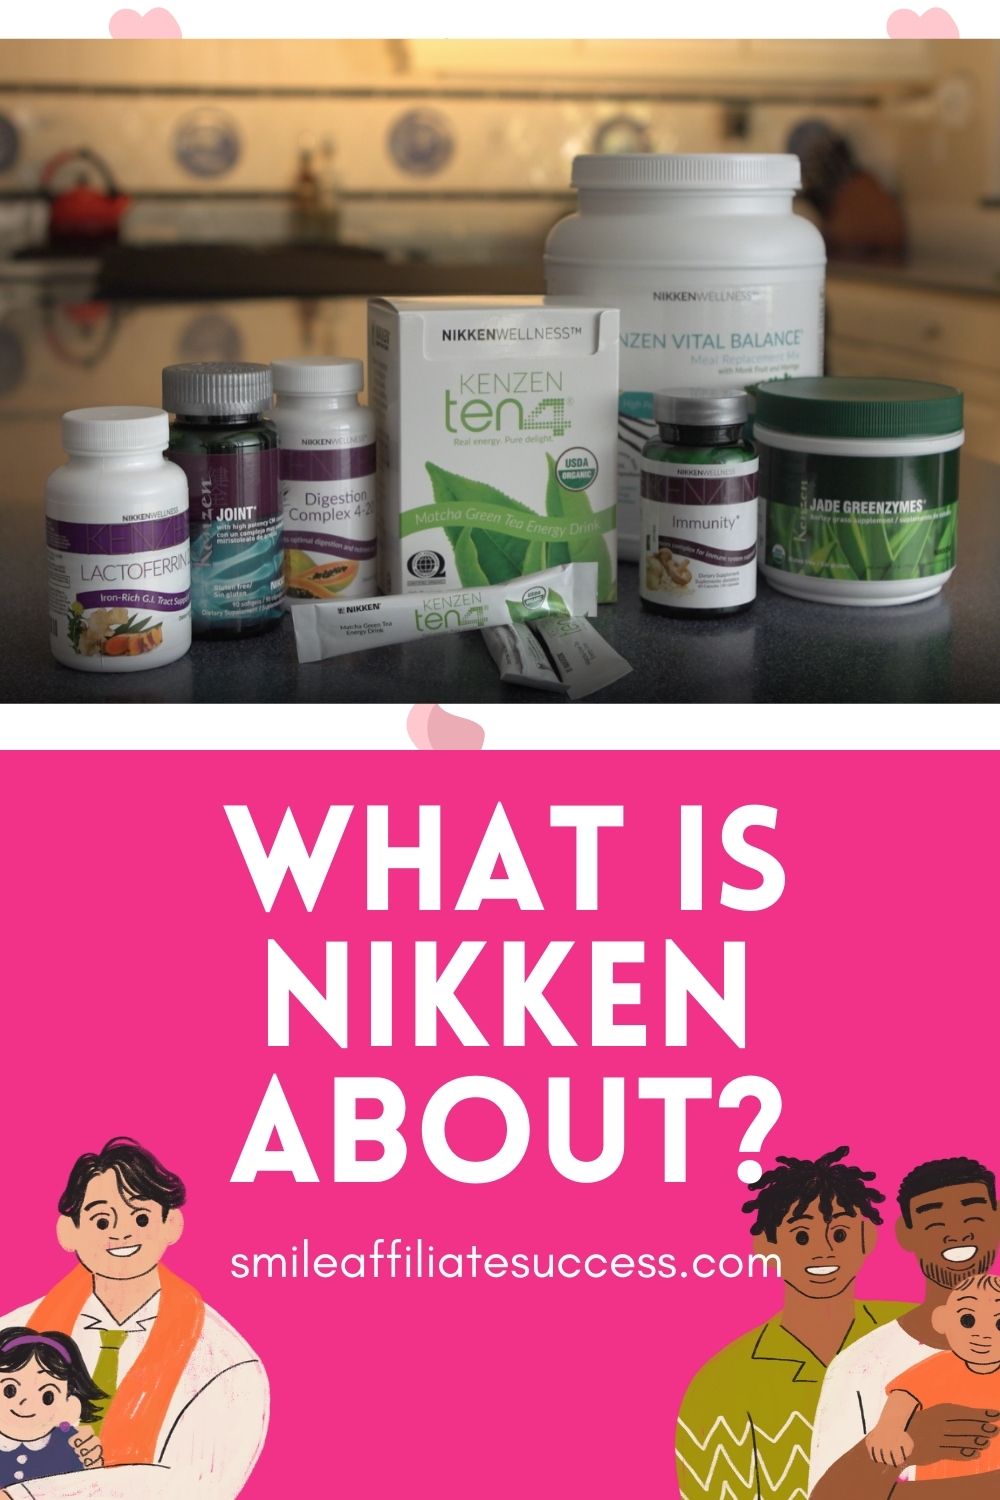 What Is Nikken About?